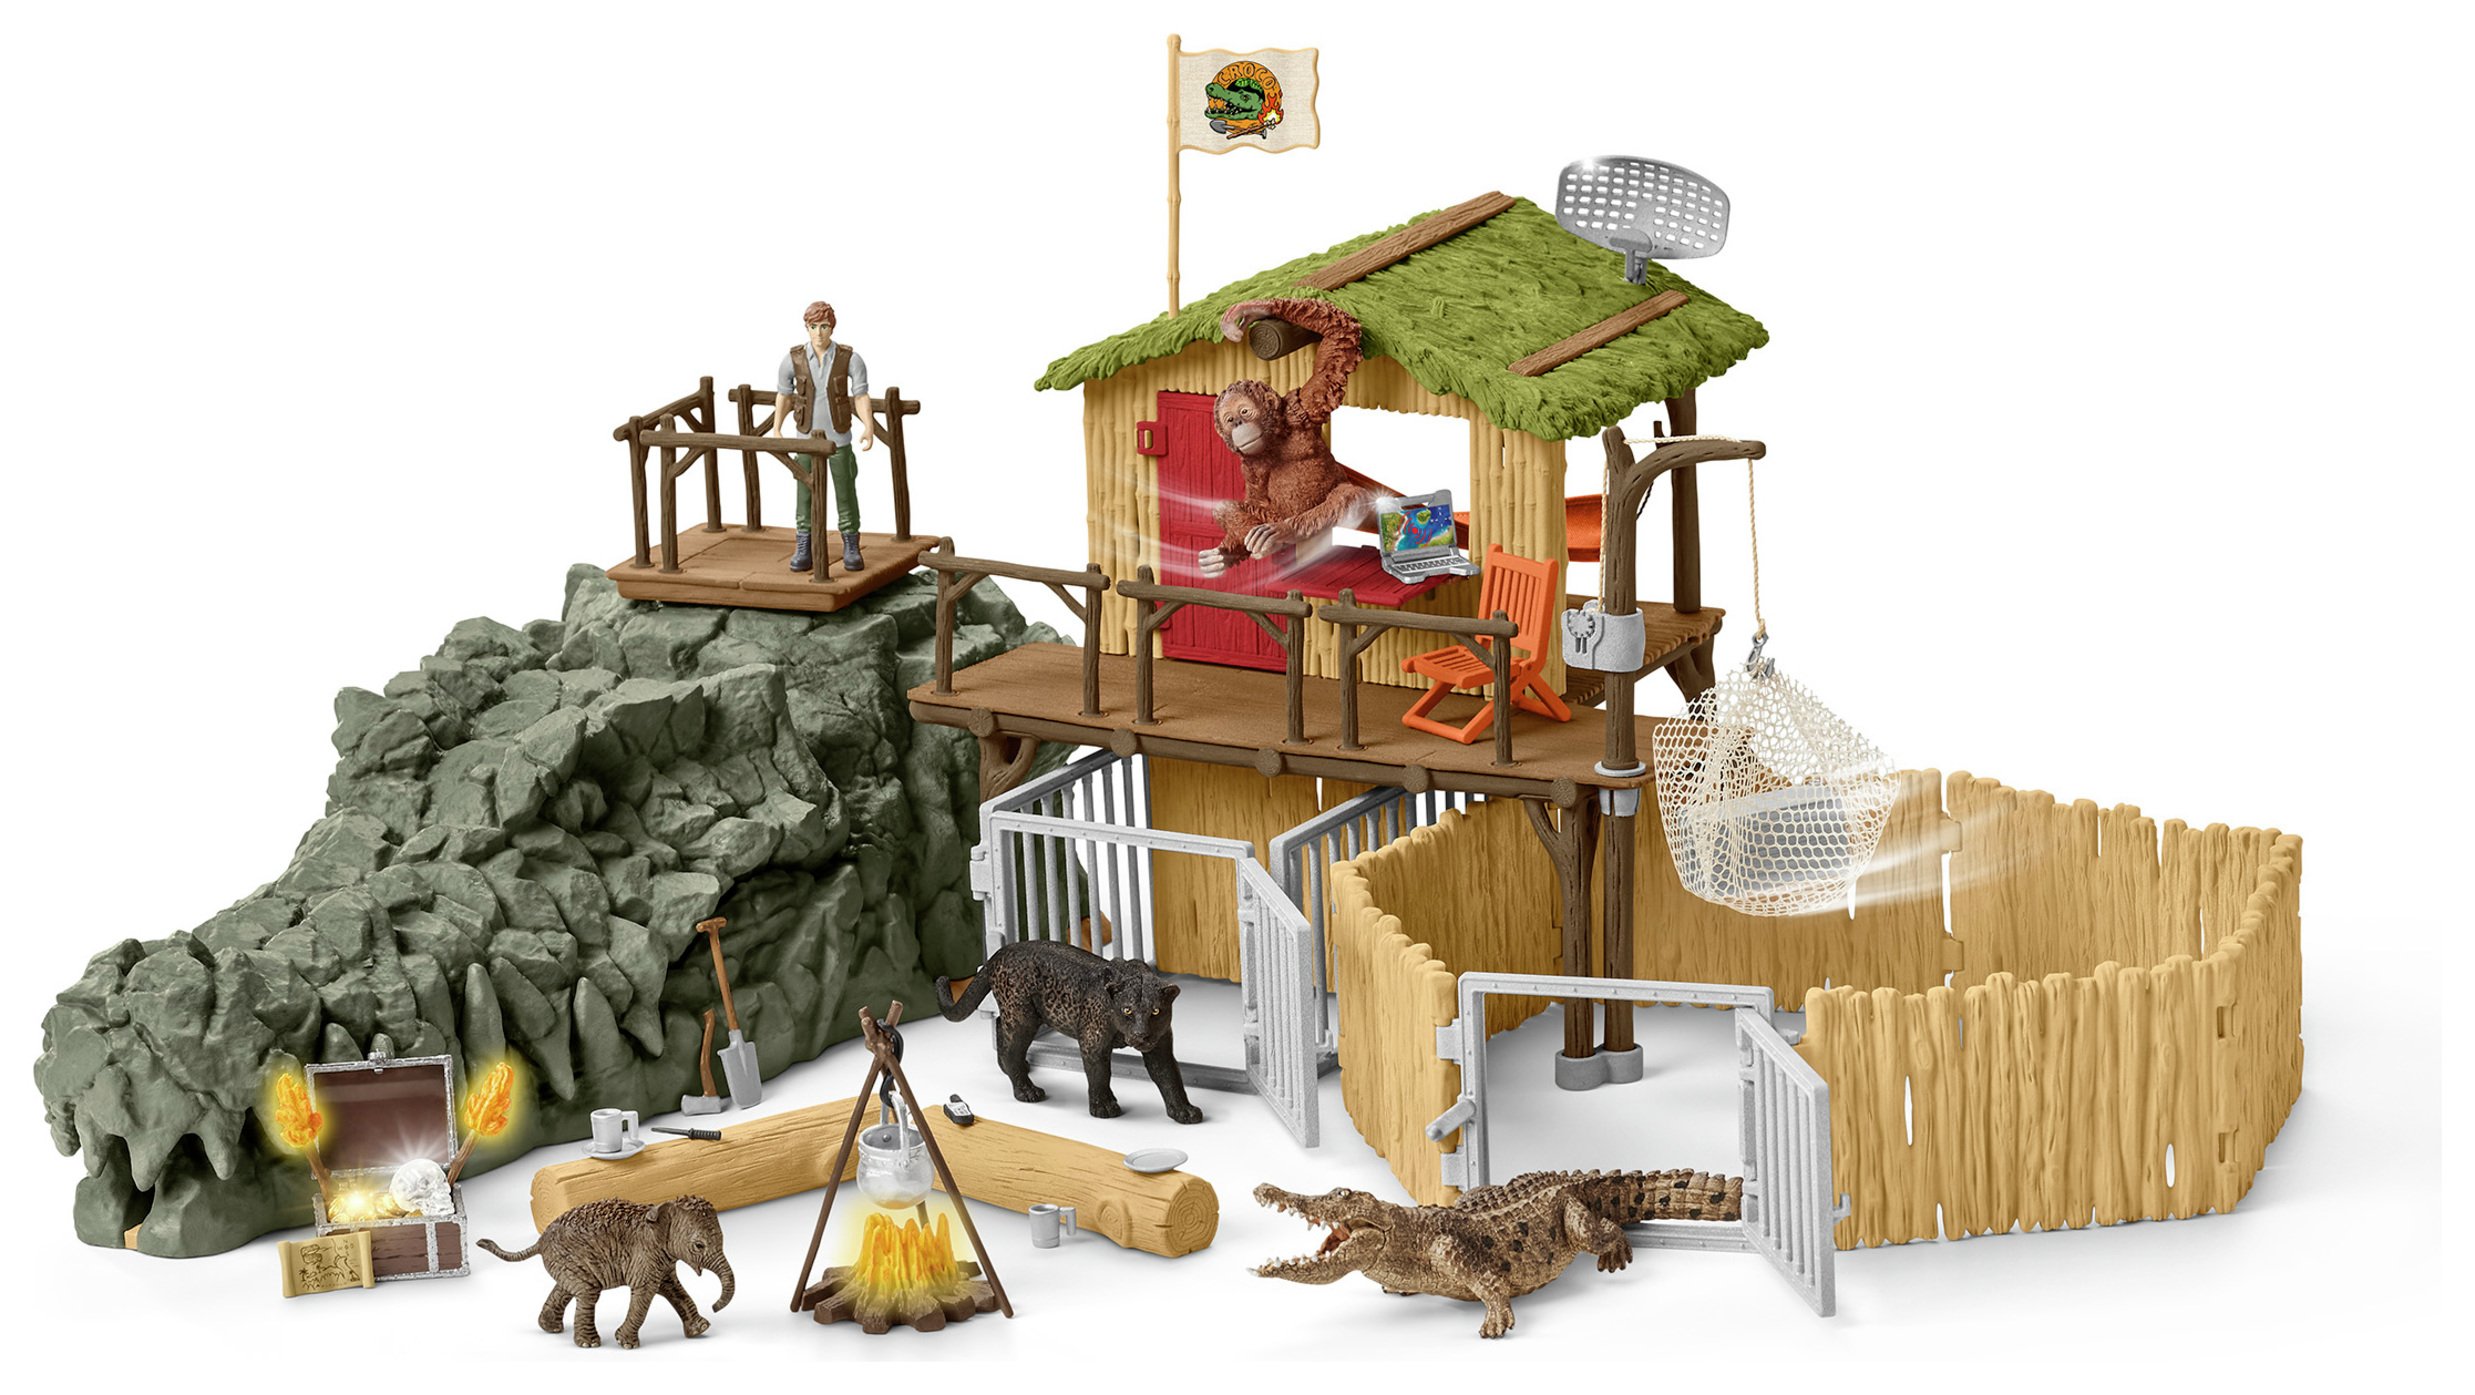 Schleich Jungle Research Station Playset